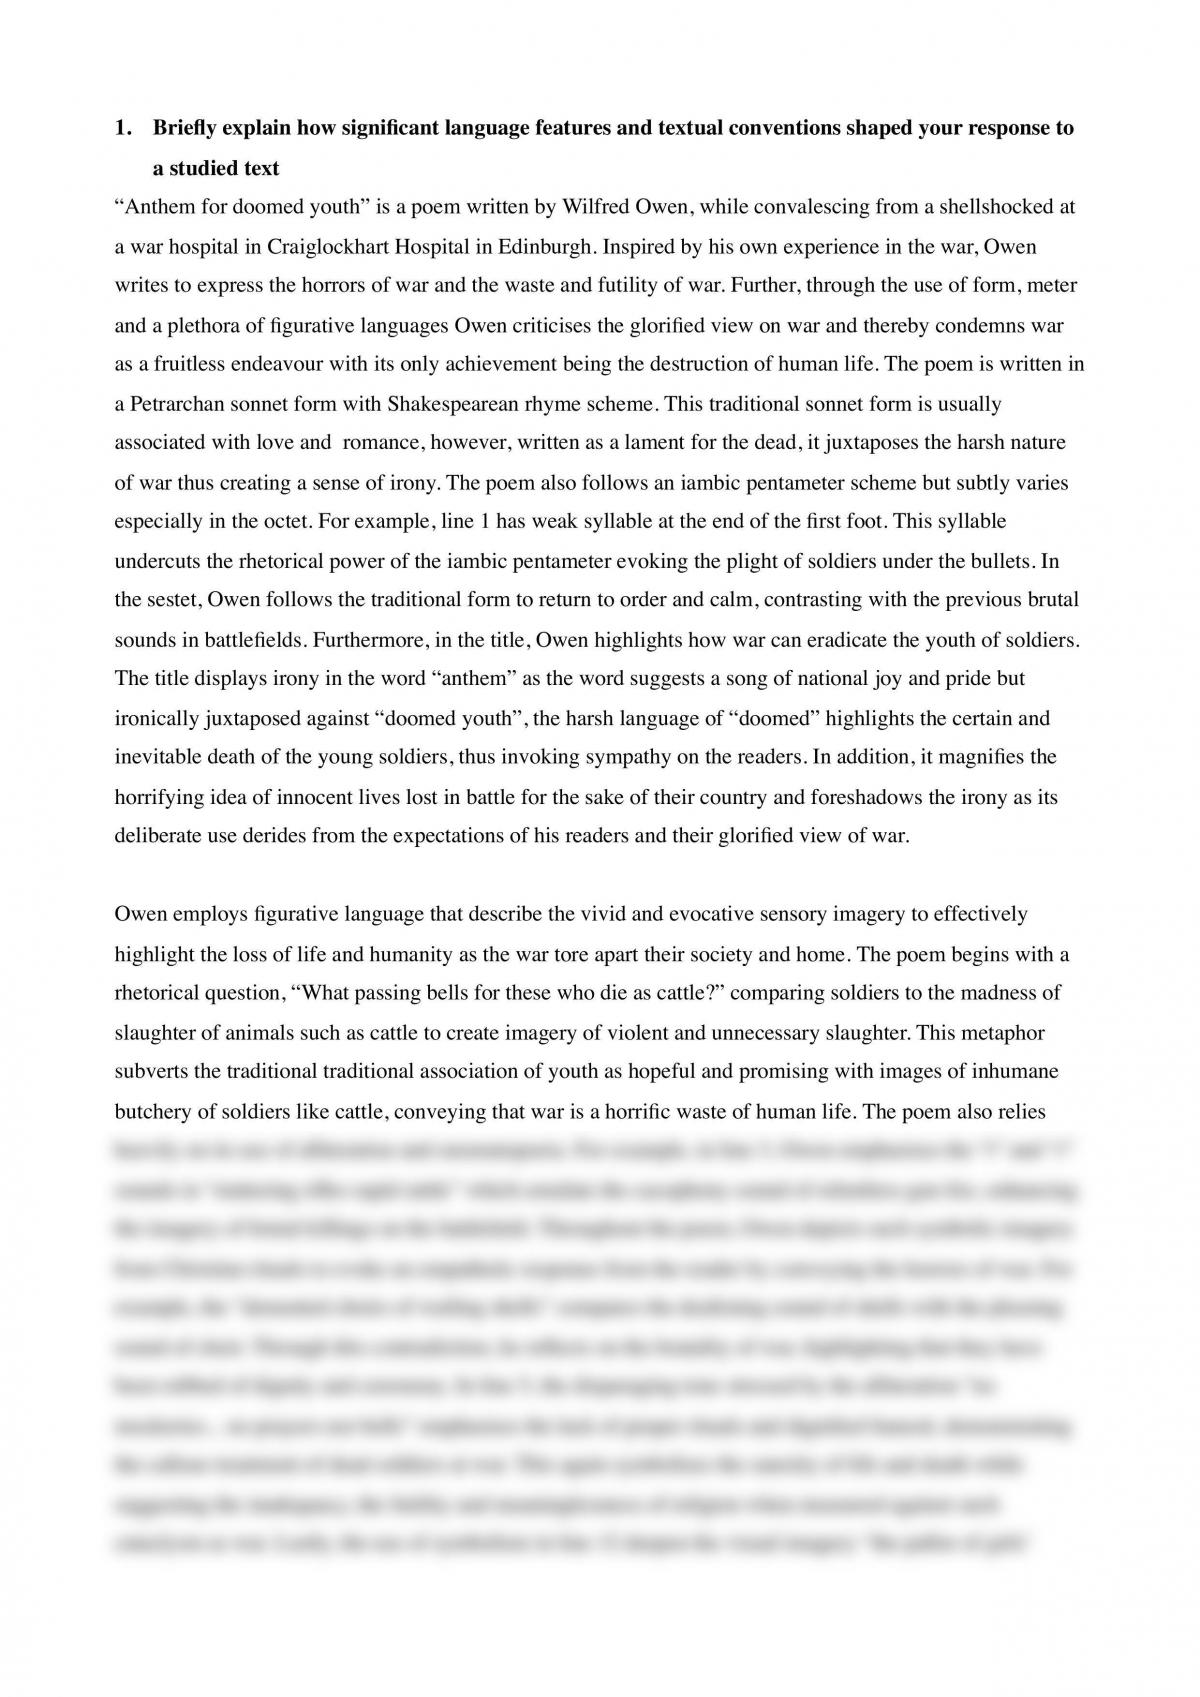 Anthem For Doomed youth- Briefly explain how significant language features and textual conventions shaped your response to a studied text - Page 1